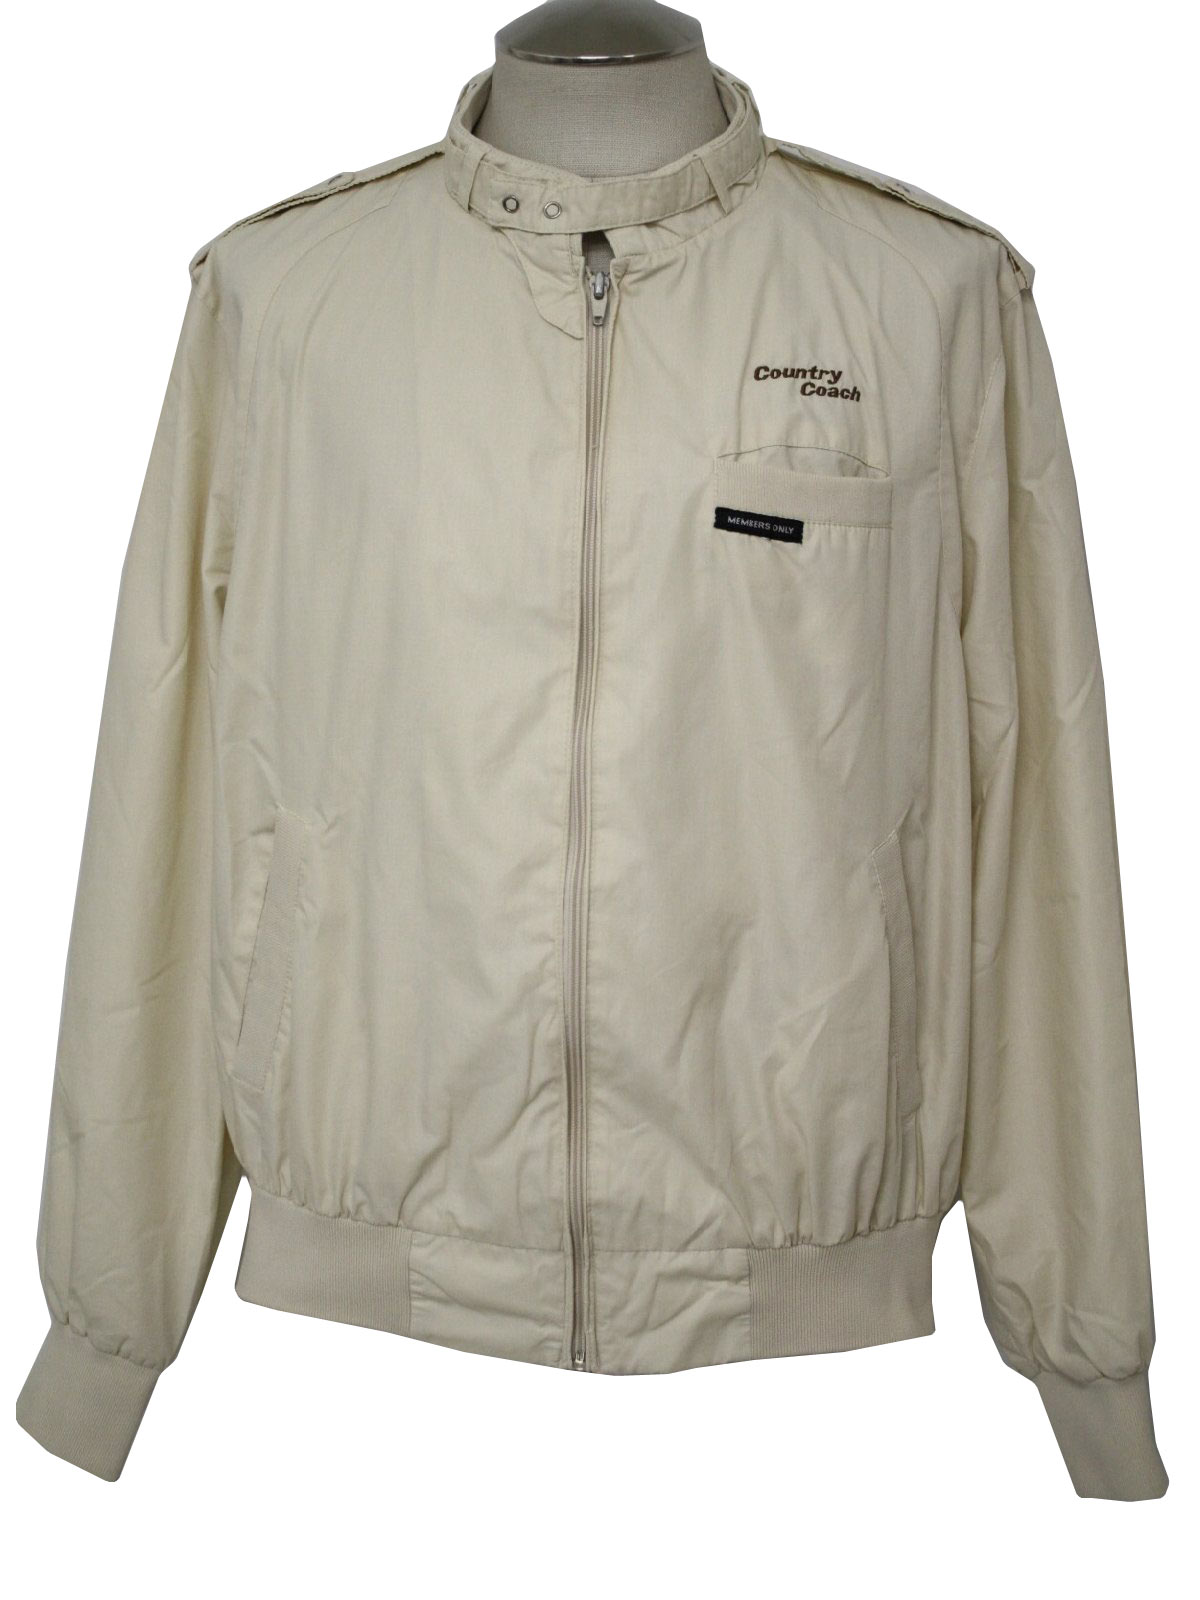 Vintage Members Only 80's Jacket: 80s -Members Only- Mens ivory ...